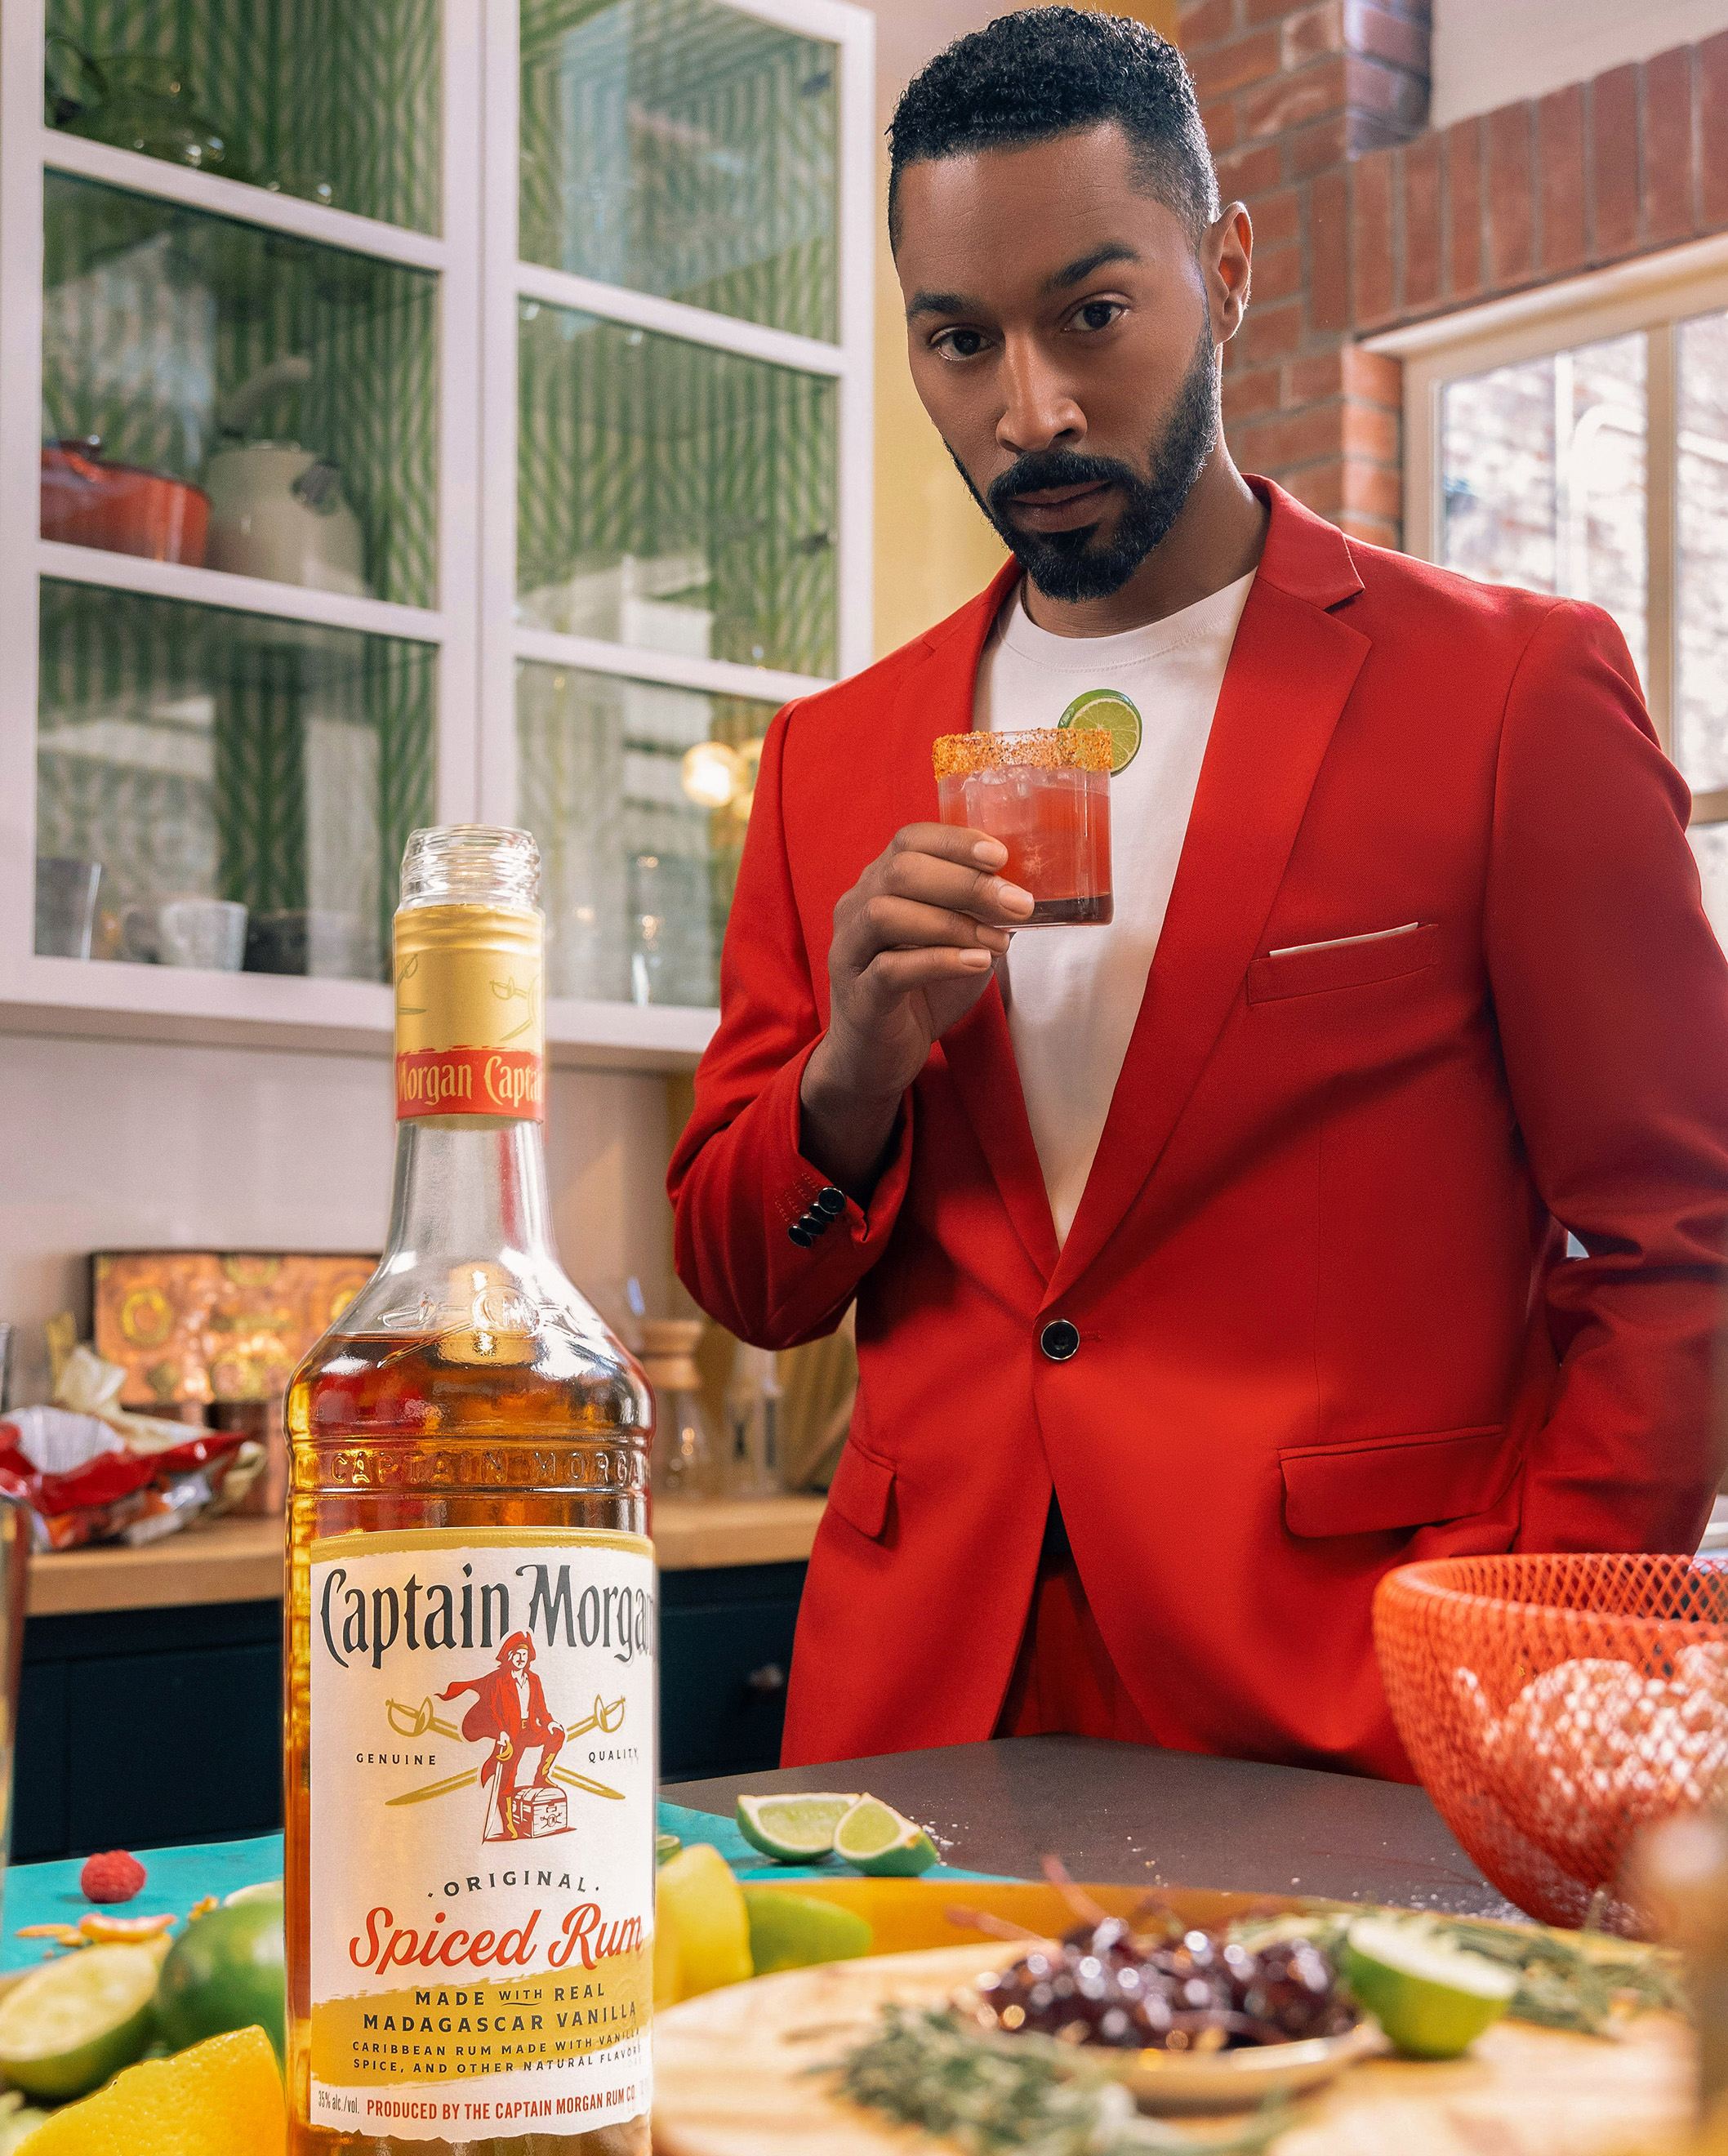 Tone Bell with Captain Morgan